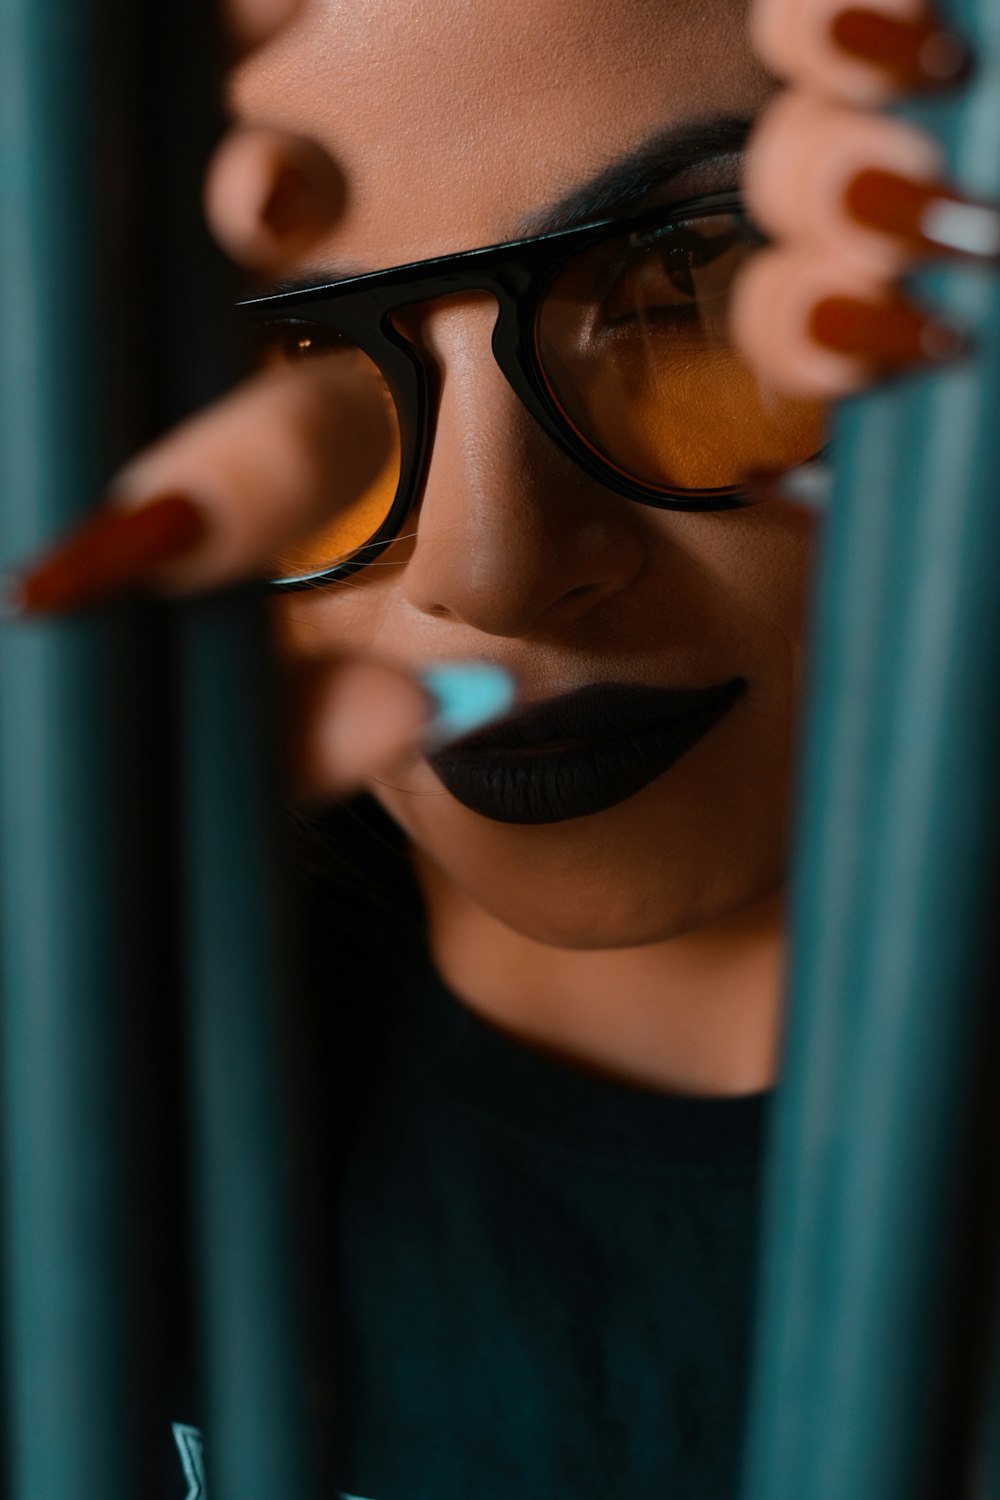 a woman wearing glasses behind bars with her eyes closed